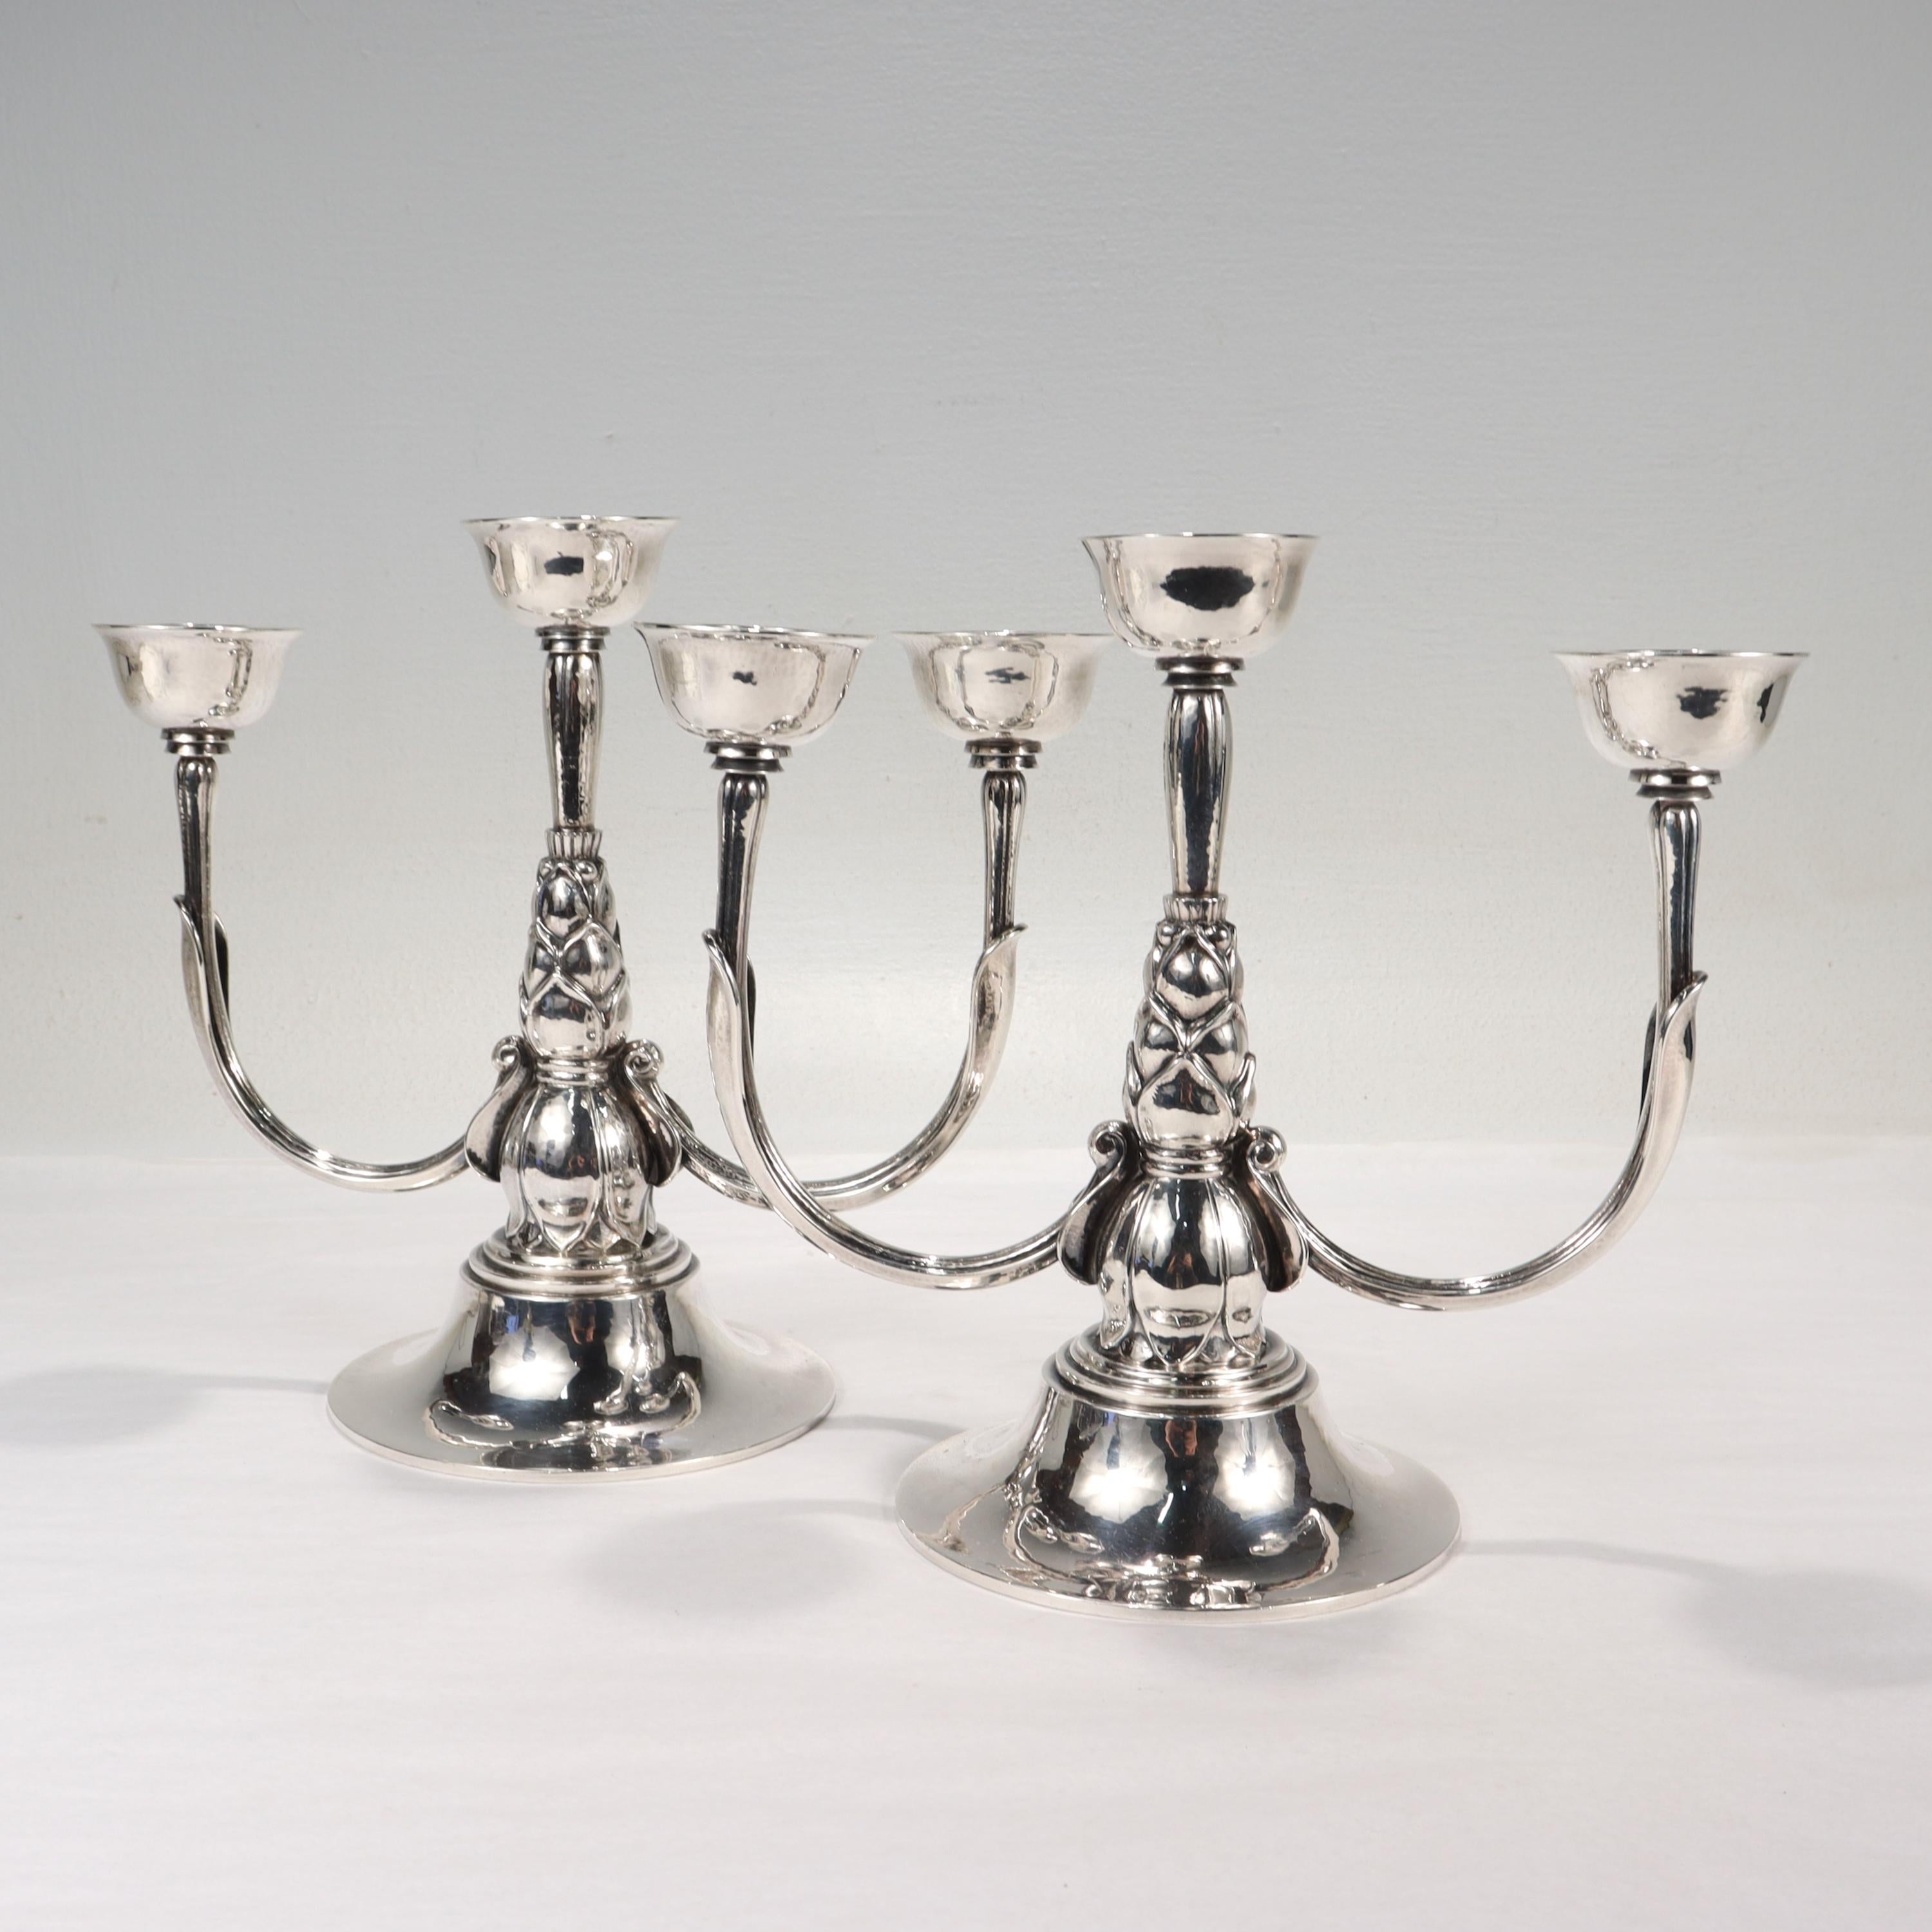 Pair of Georg Jensen Art Deco 537 C Sterling Silver Candelabra by Harald Nielsen In Good Condition For Sale In Philadelphia, PA